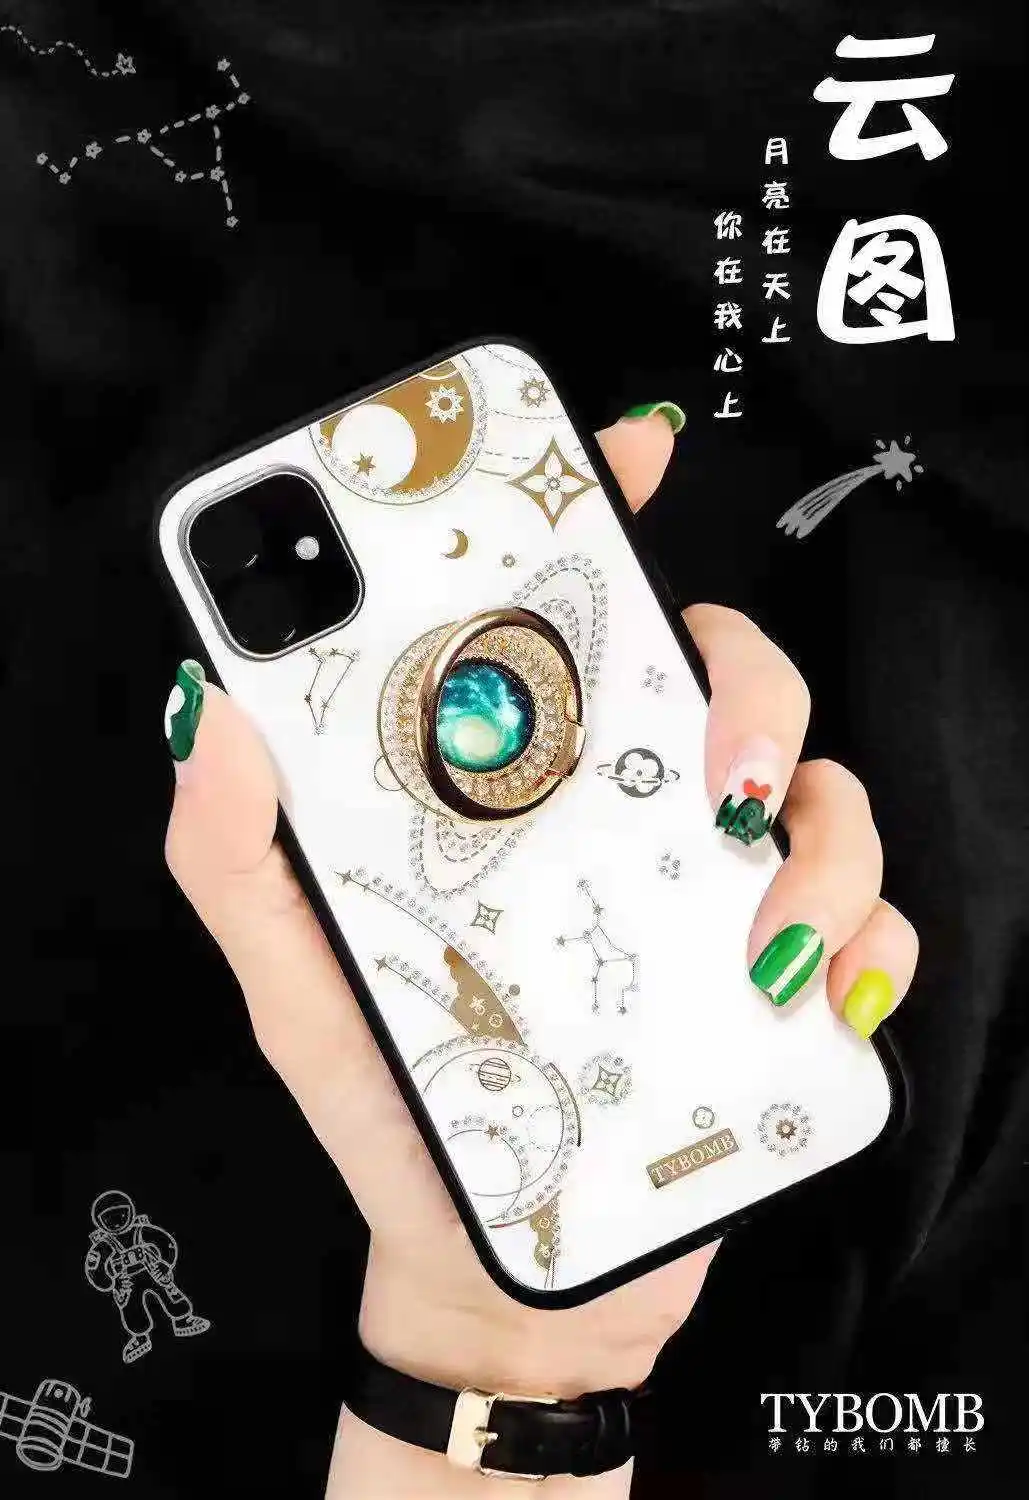 

Crystal And "Diamond-Encrusted Planet Design" Cell Phone Case For Iphone Se 11 6.1 Inches 12Pro Max Xs Xr Xsmax 7 8G&Plus